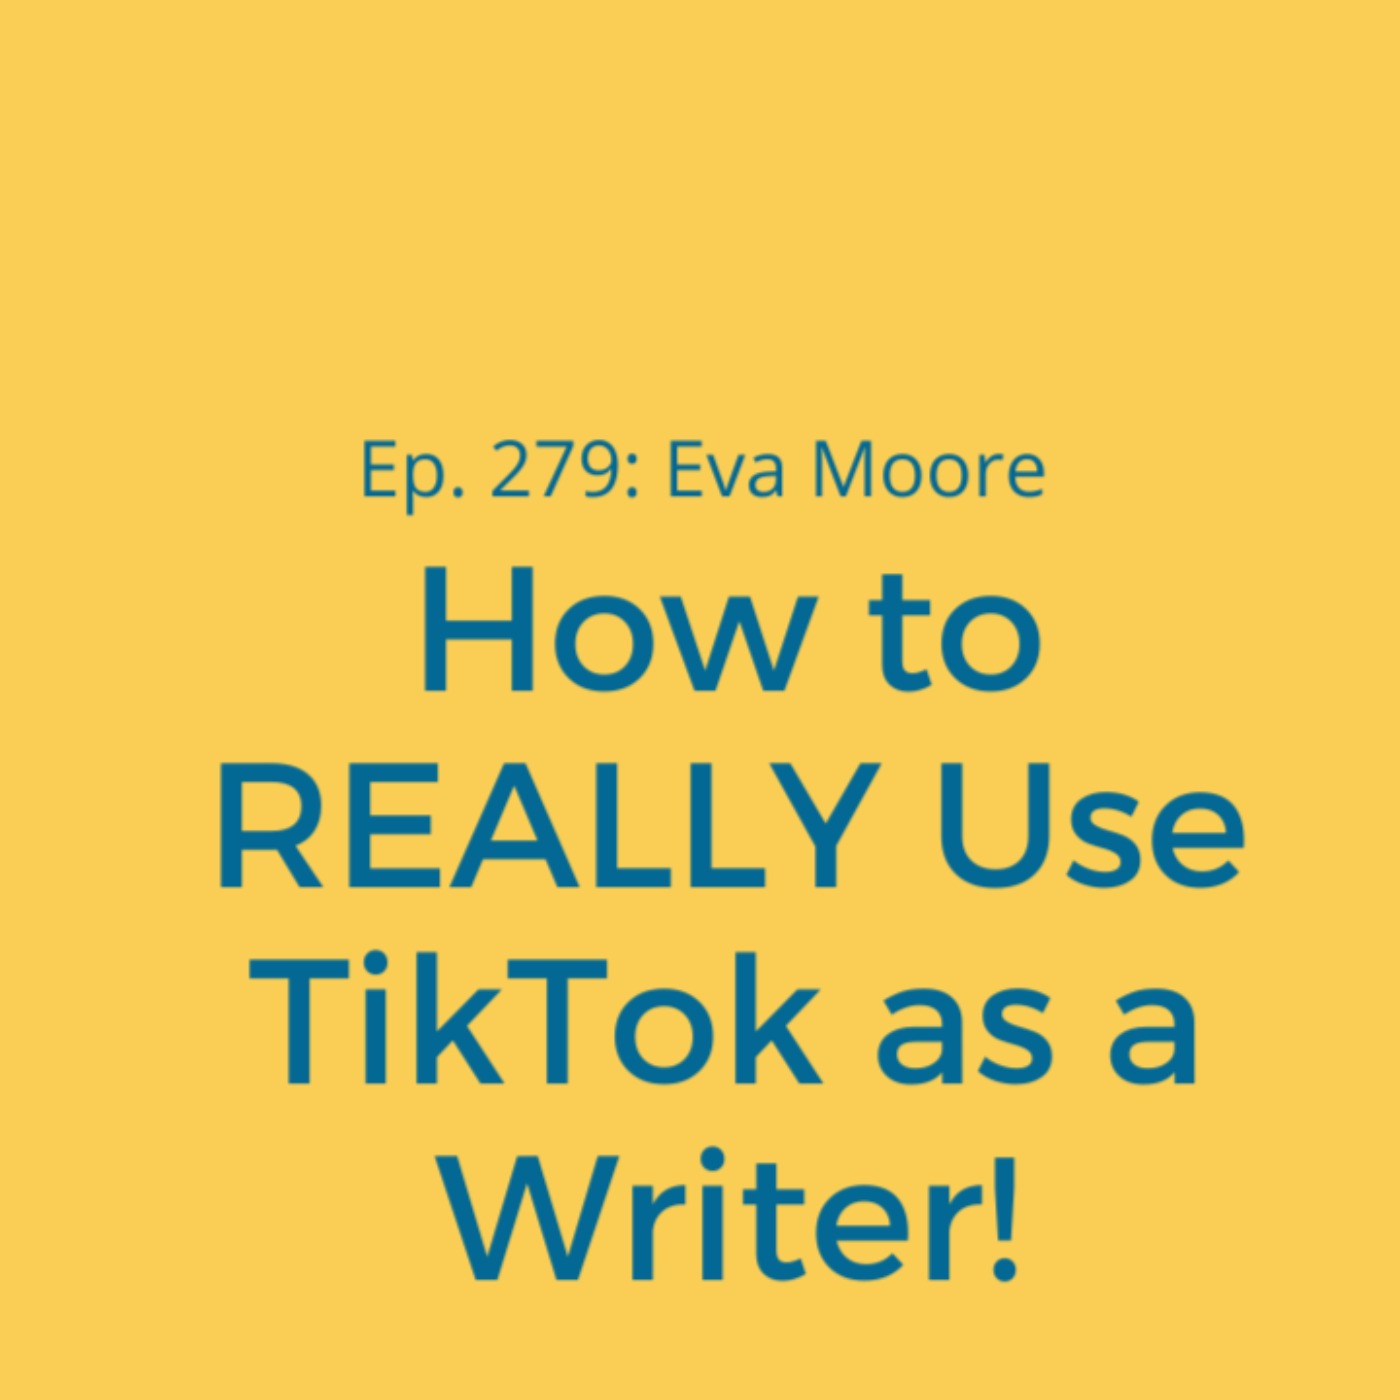 Ep. 279: Eva Moore on How to REALLY Use TikTok as a Writer!